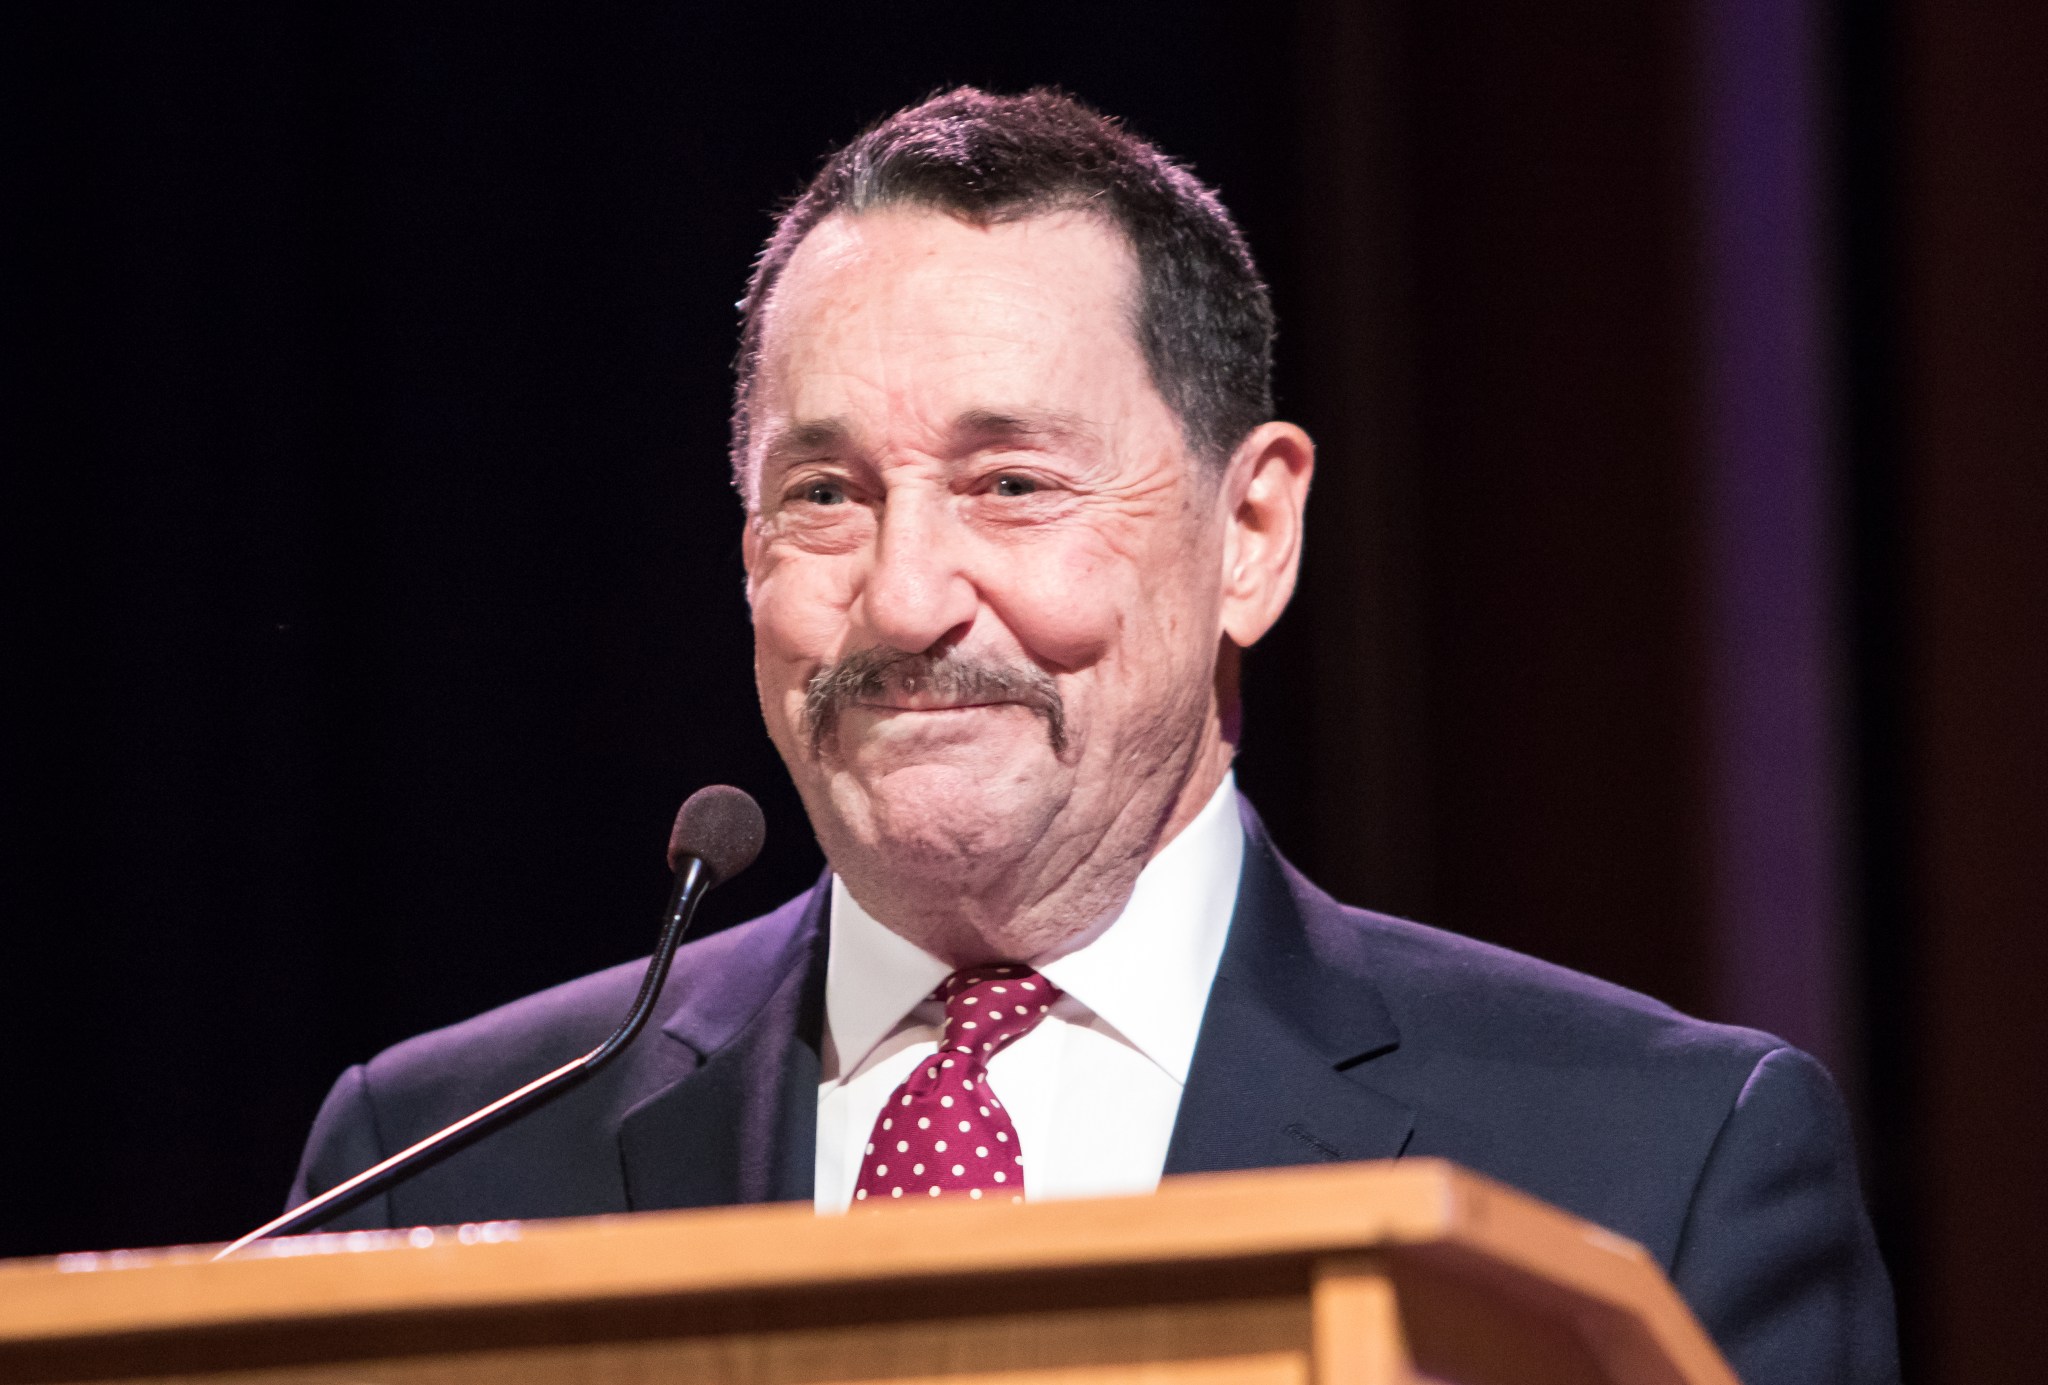 Close-up photo of Peter Cullen as he speaks to students behind a lectern.